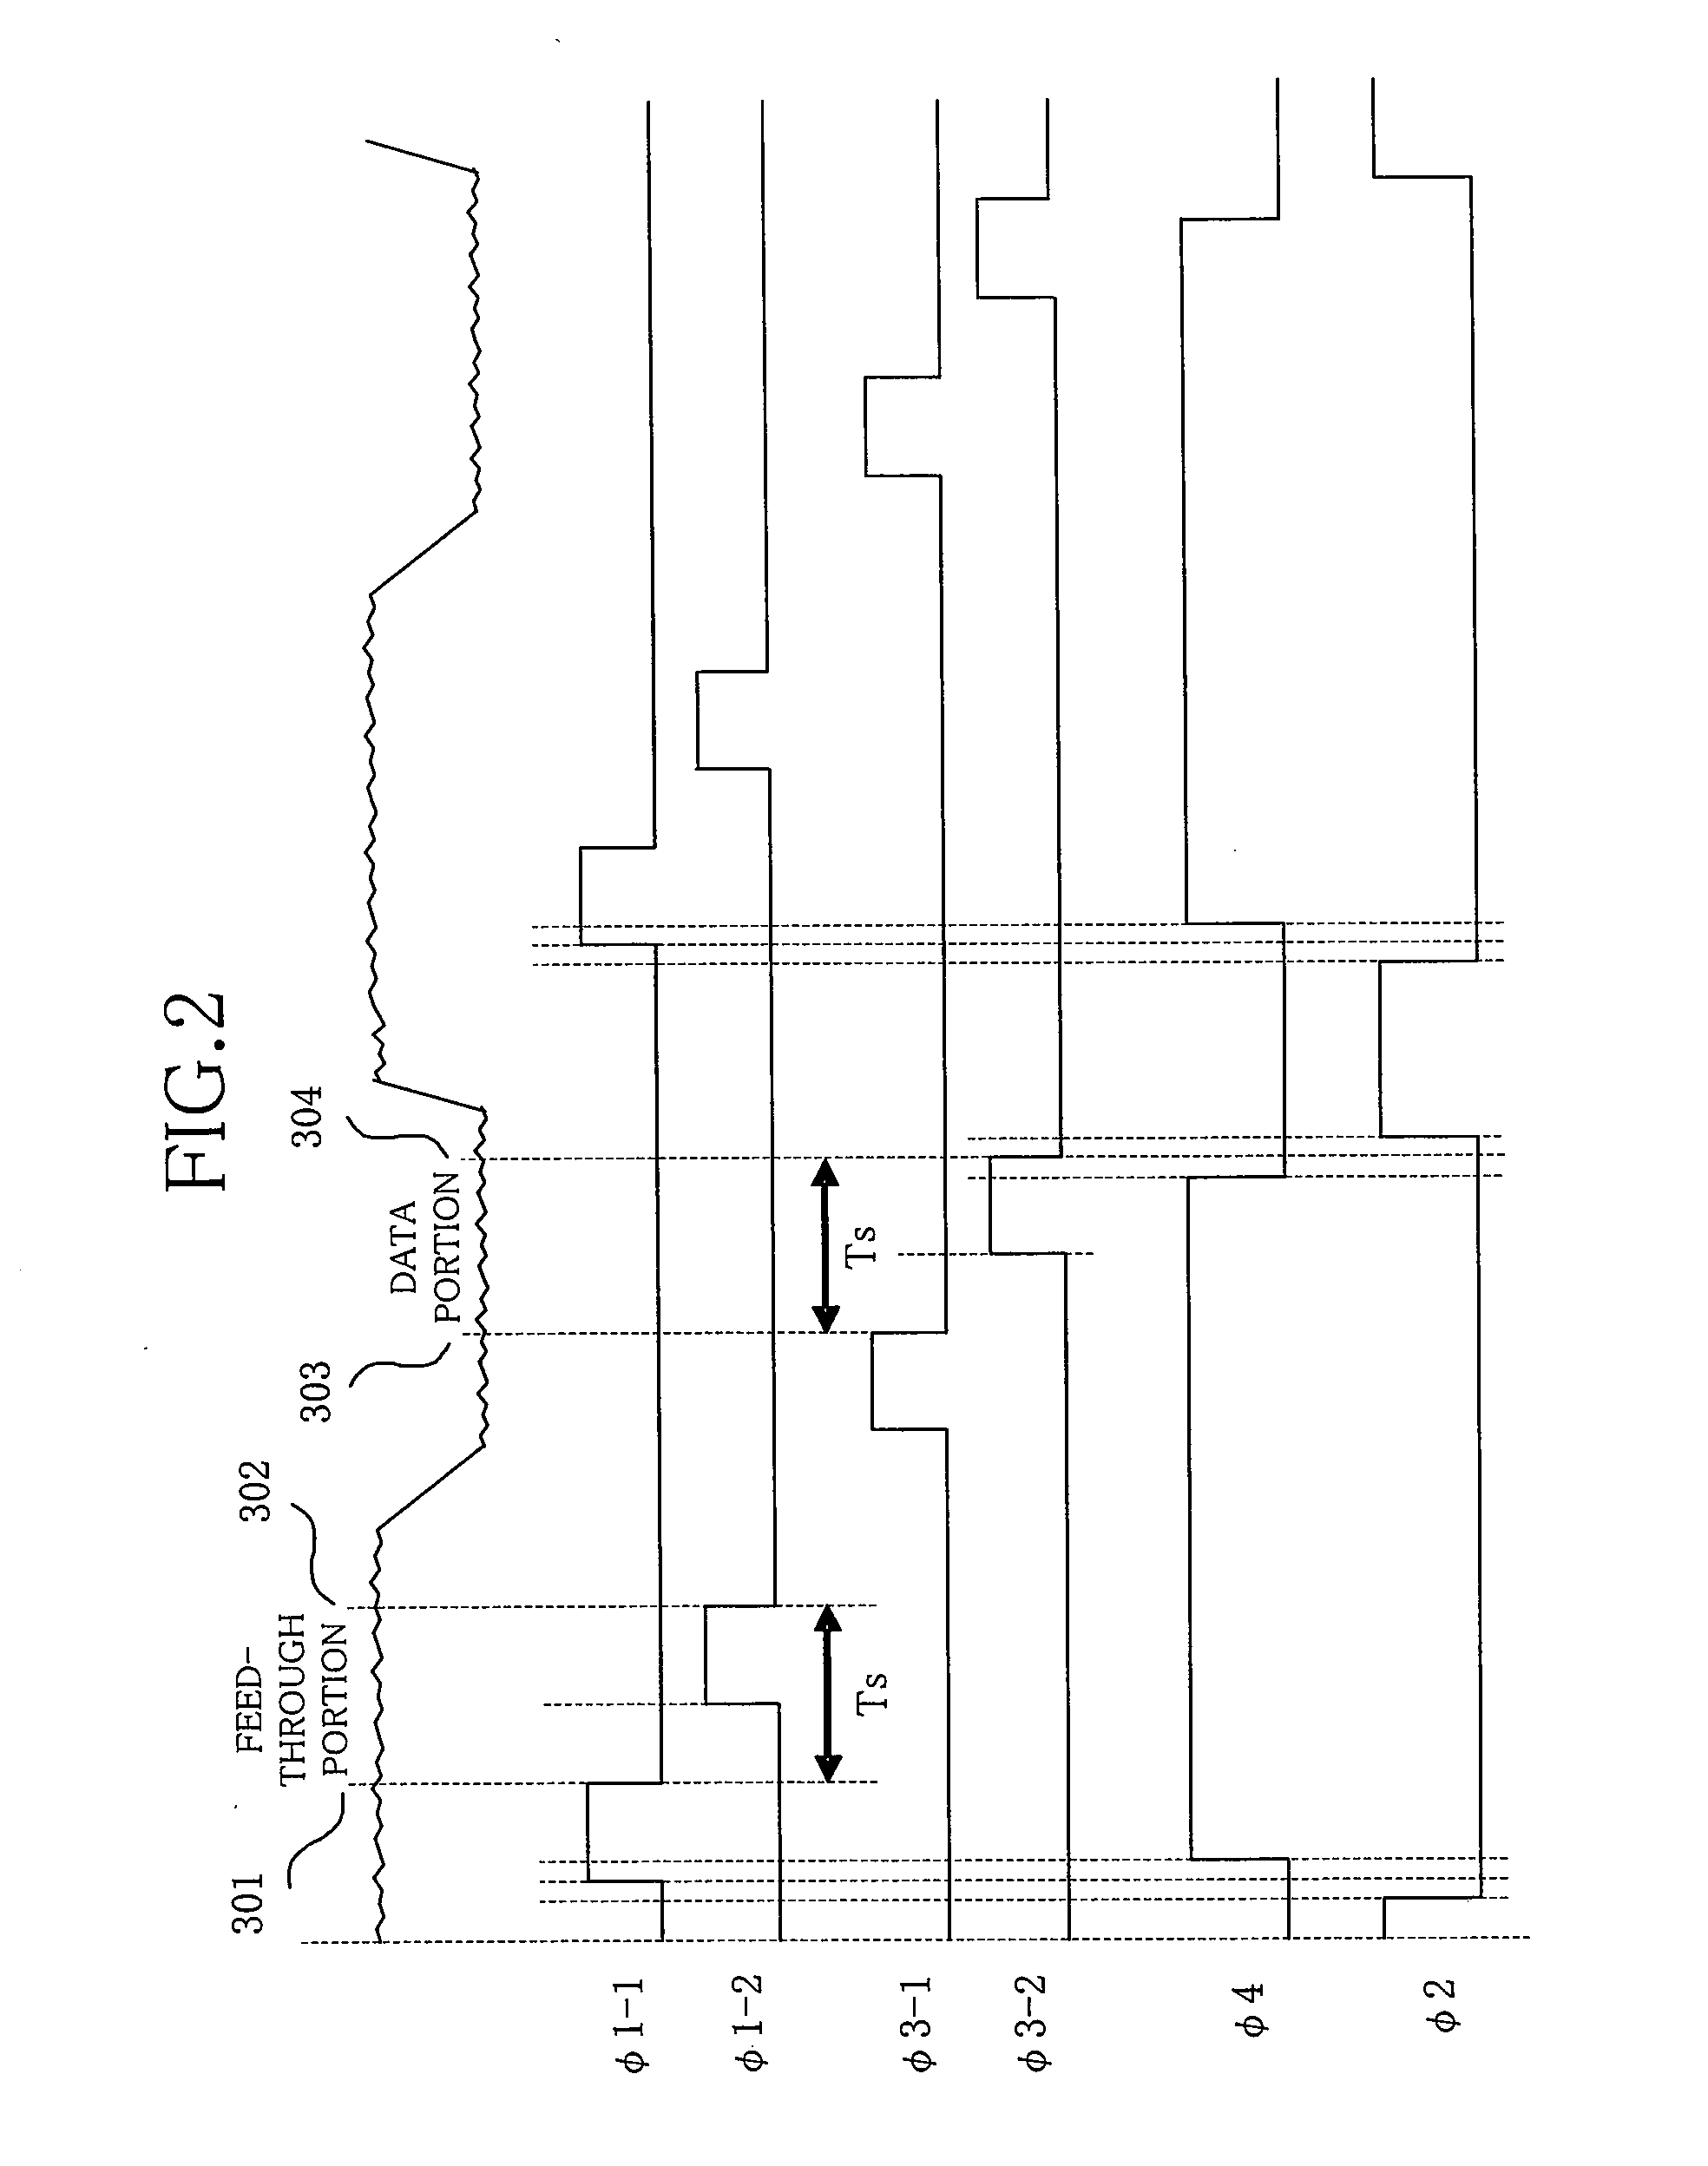 Correlated double sampling circuit and sample hold circuit